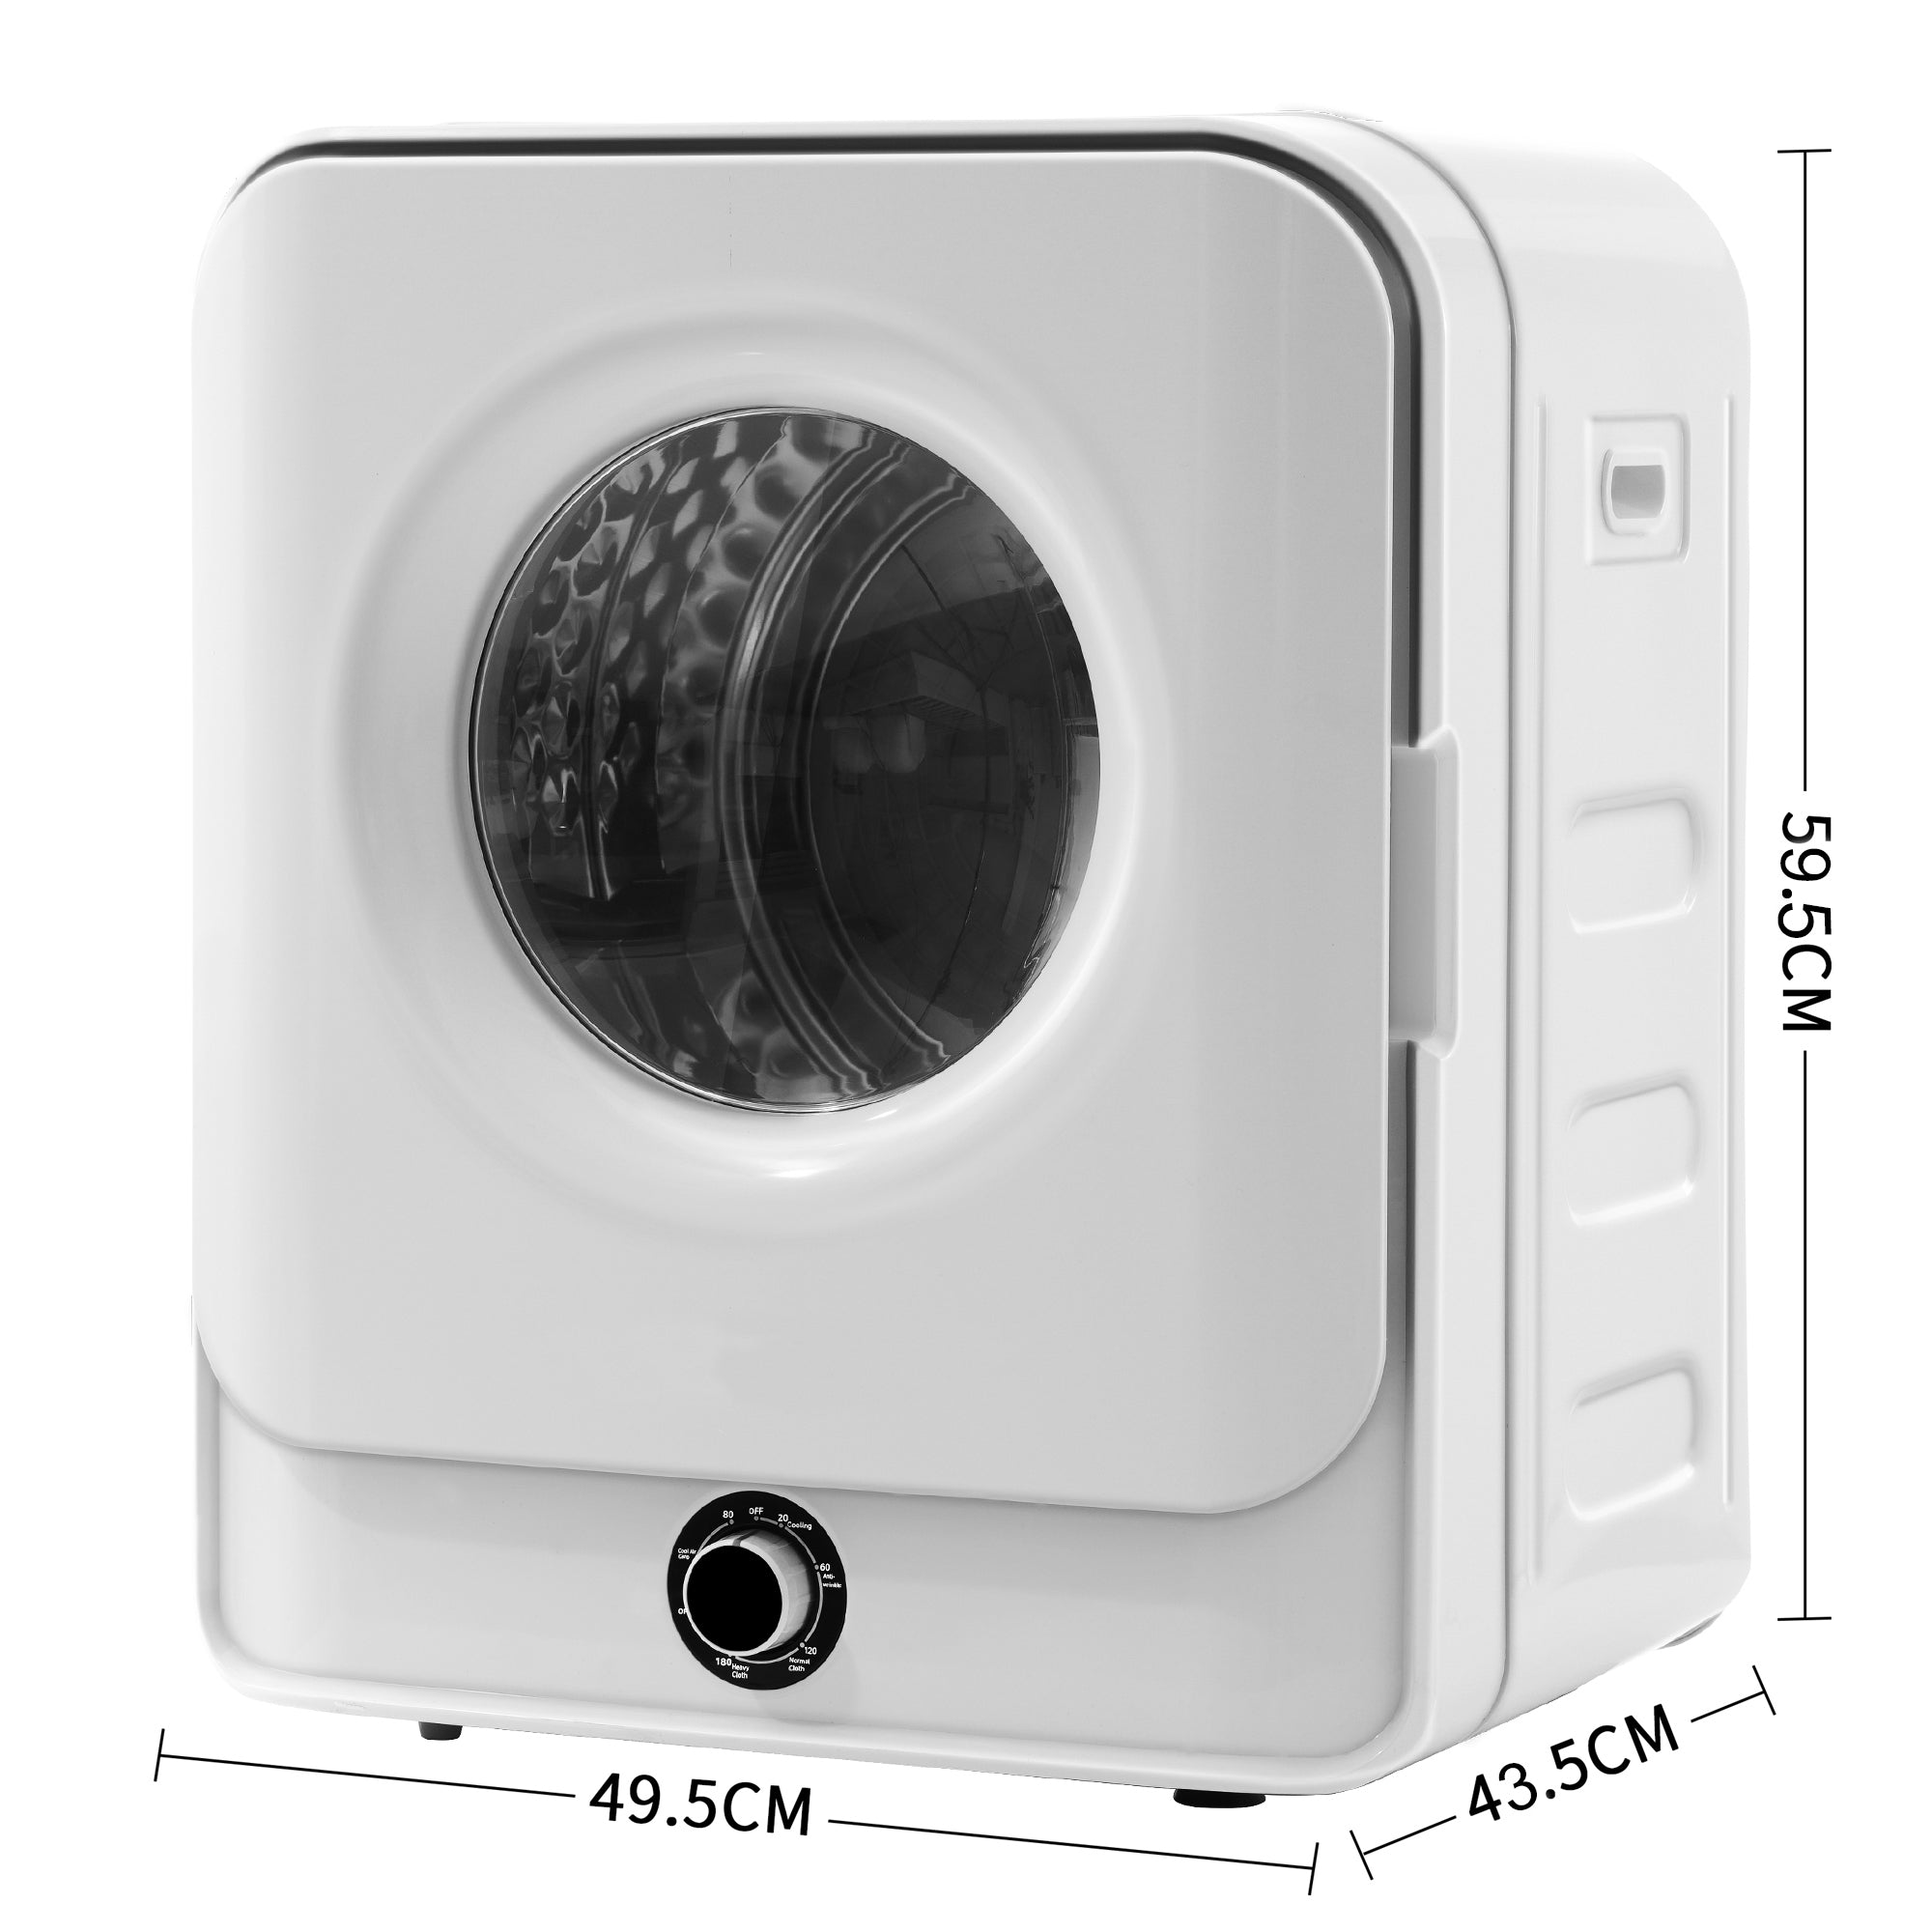 1.95Cu.ft Clothes Dryer, 830W, Stainless Steel white-abs+steel(q235)